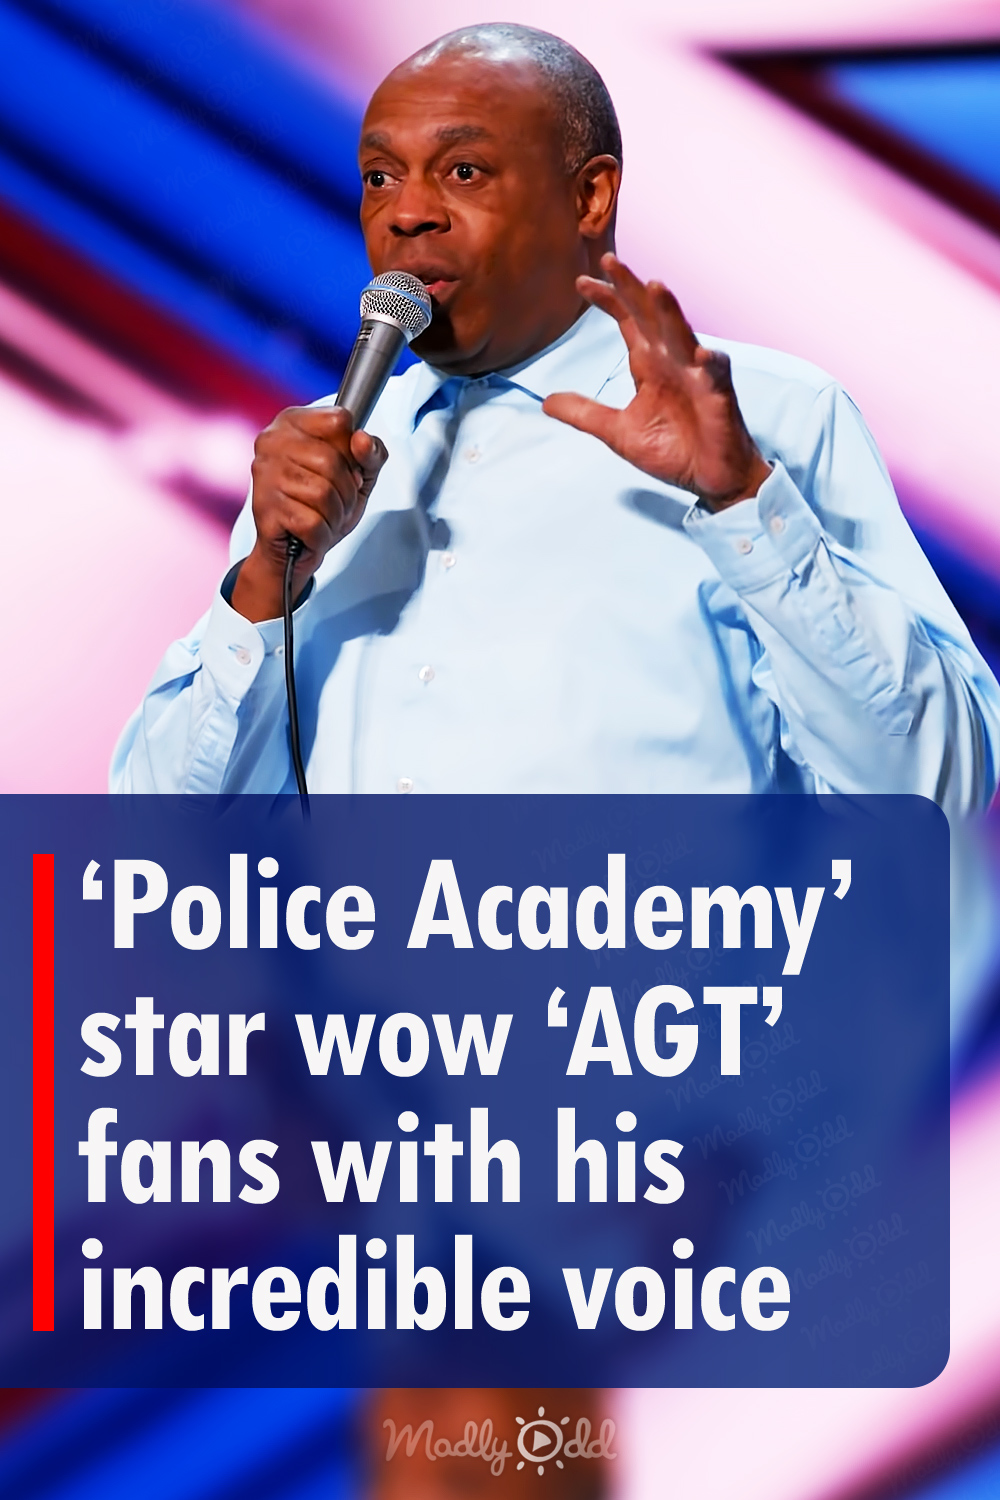 ‘Police Academy’ star wow ‘AGT’ fans with his incredible voice